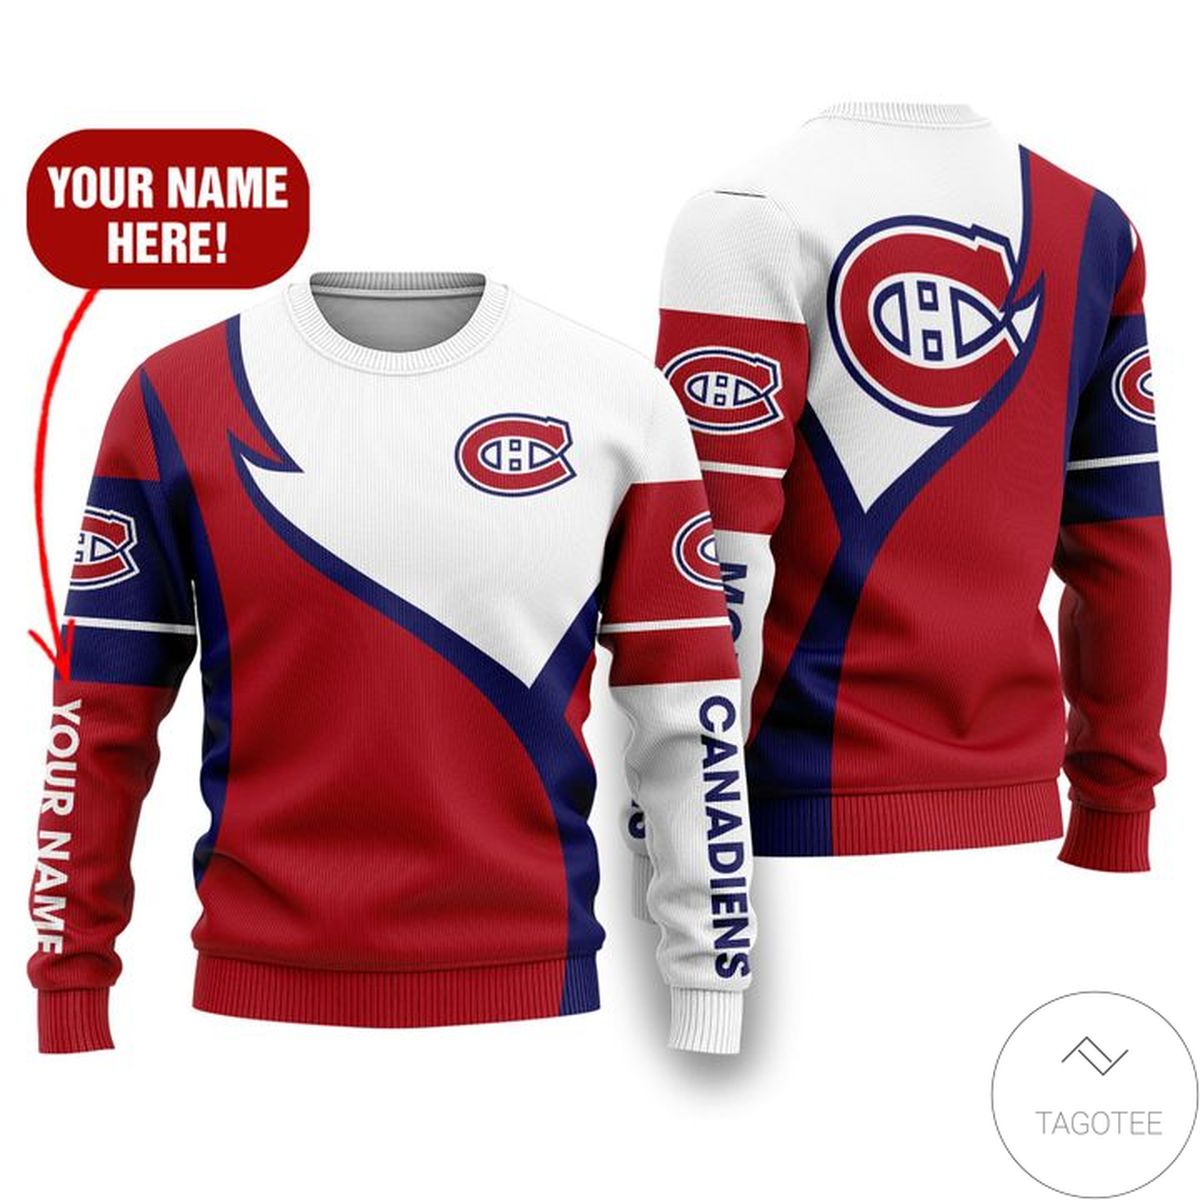 Personalized Nhl Montreal Canadiens 3d Sweater